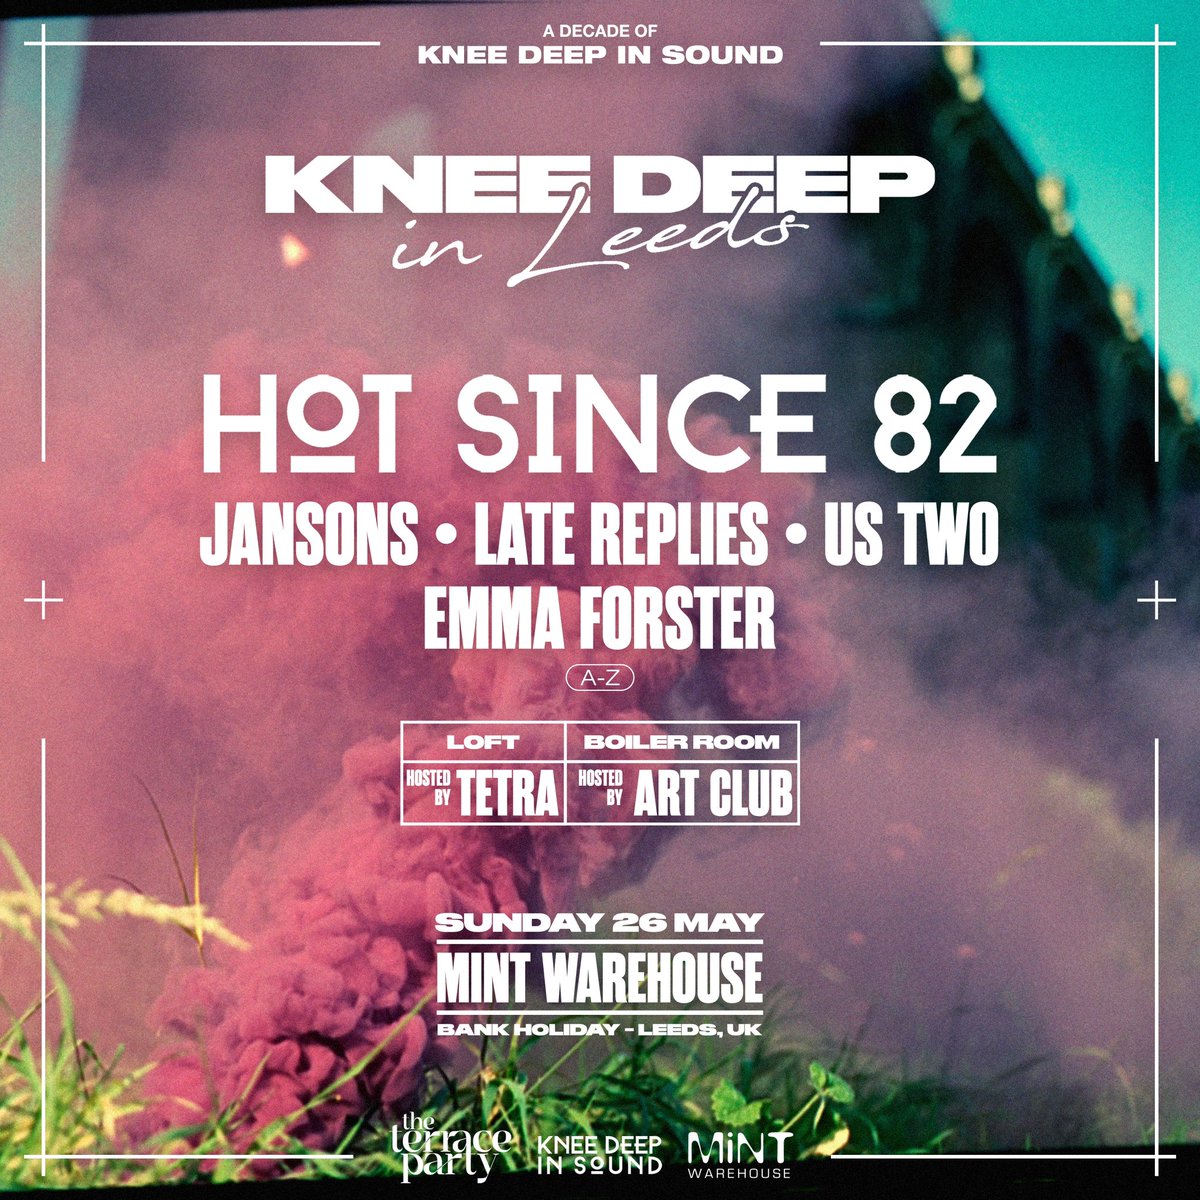 KNEE DEEP IN LEEDS TERRACE PARTY Hot Since 82 celebrates a decade of Knee Deep in Sound with an outdoor Terrace Party! tickets now on sale at mintleeds.com!